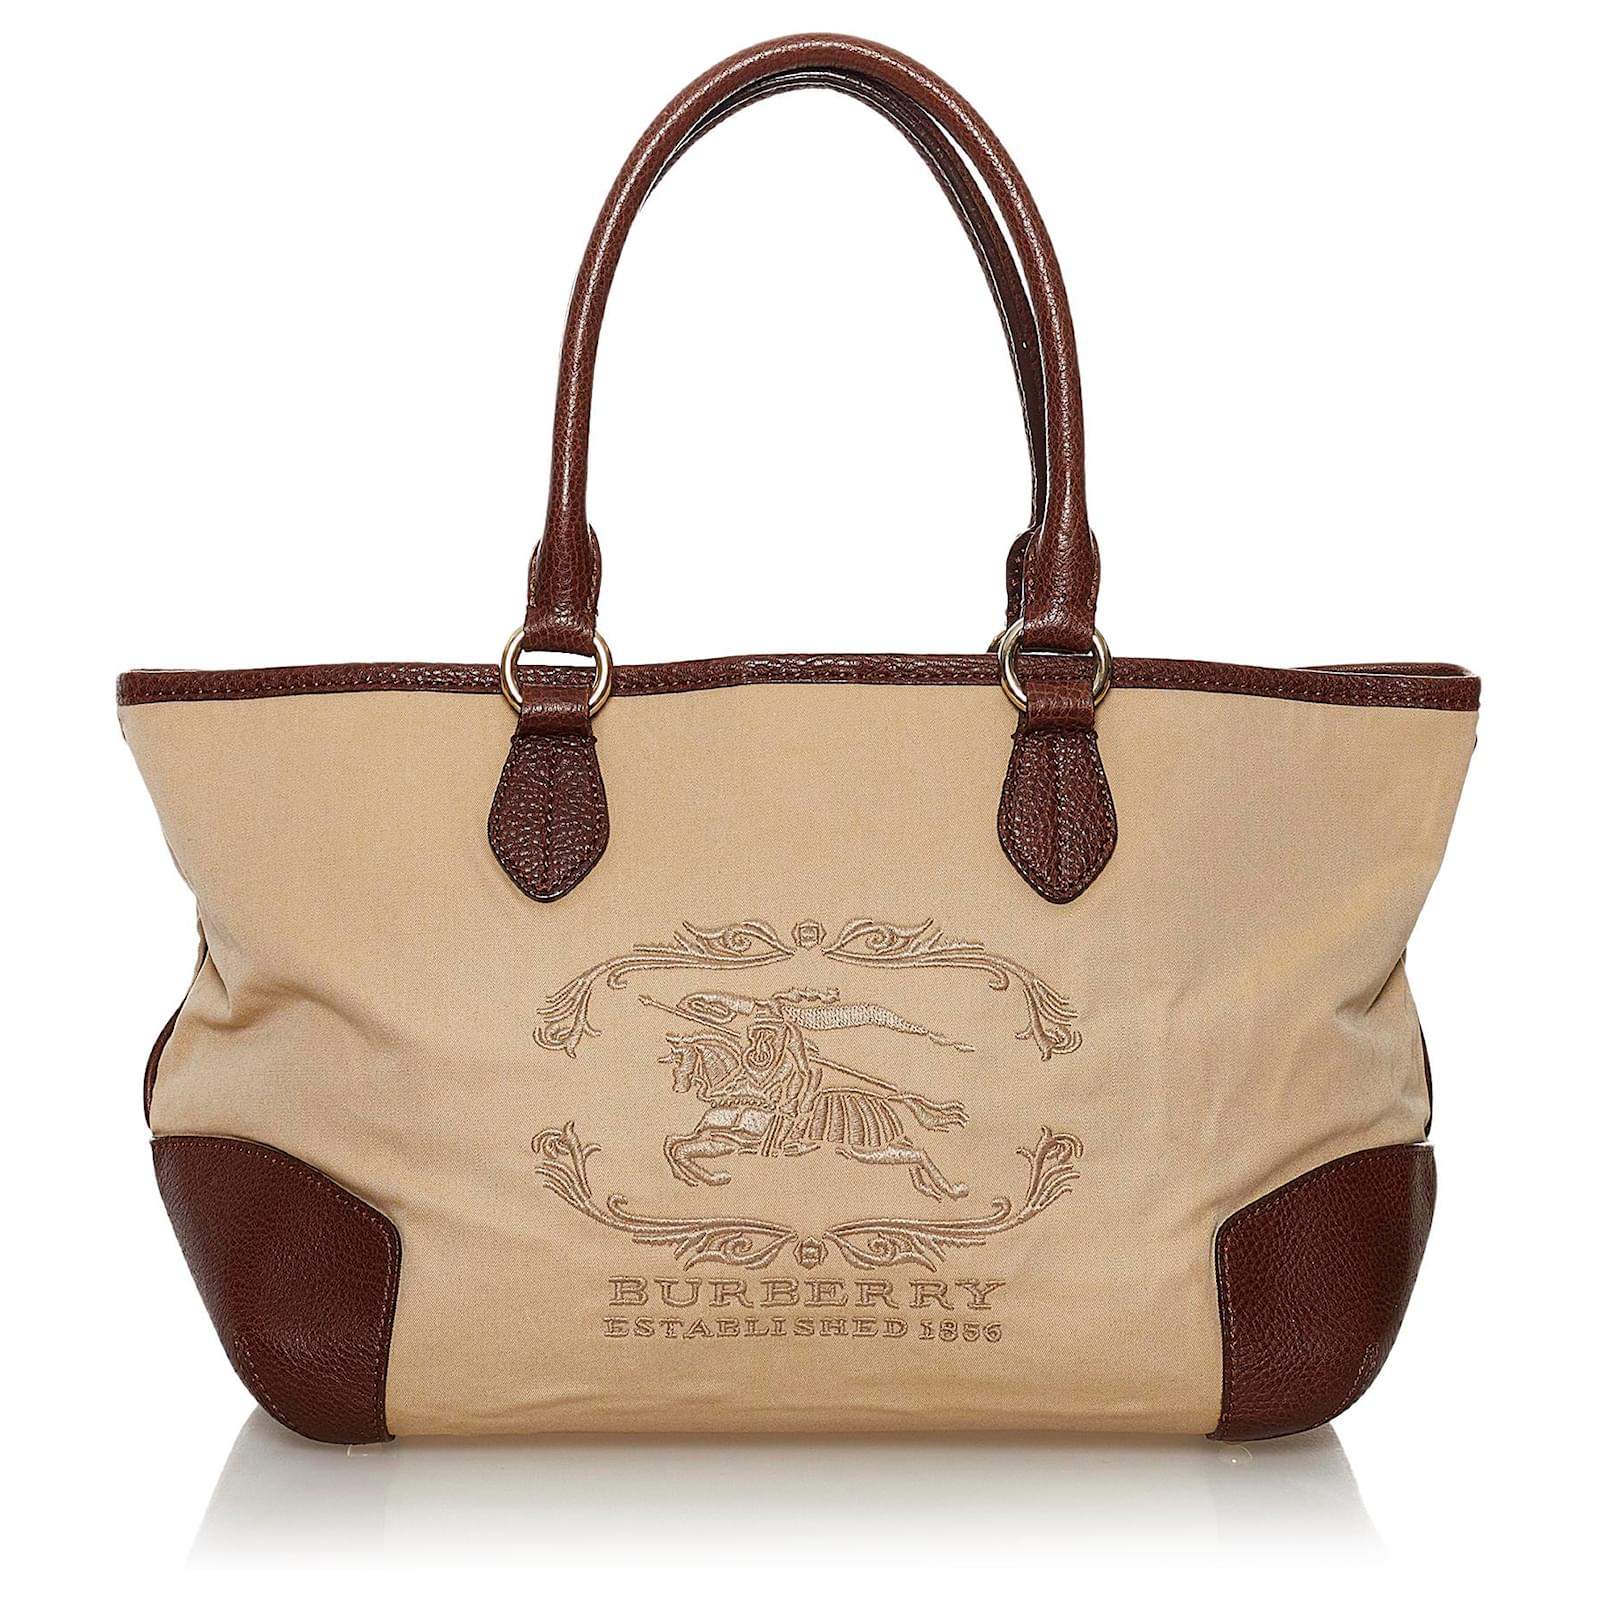 Burberry Brown Canvas Tote Bag Beige Dark brown Leather Cloth